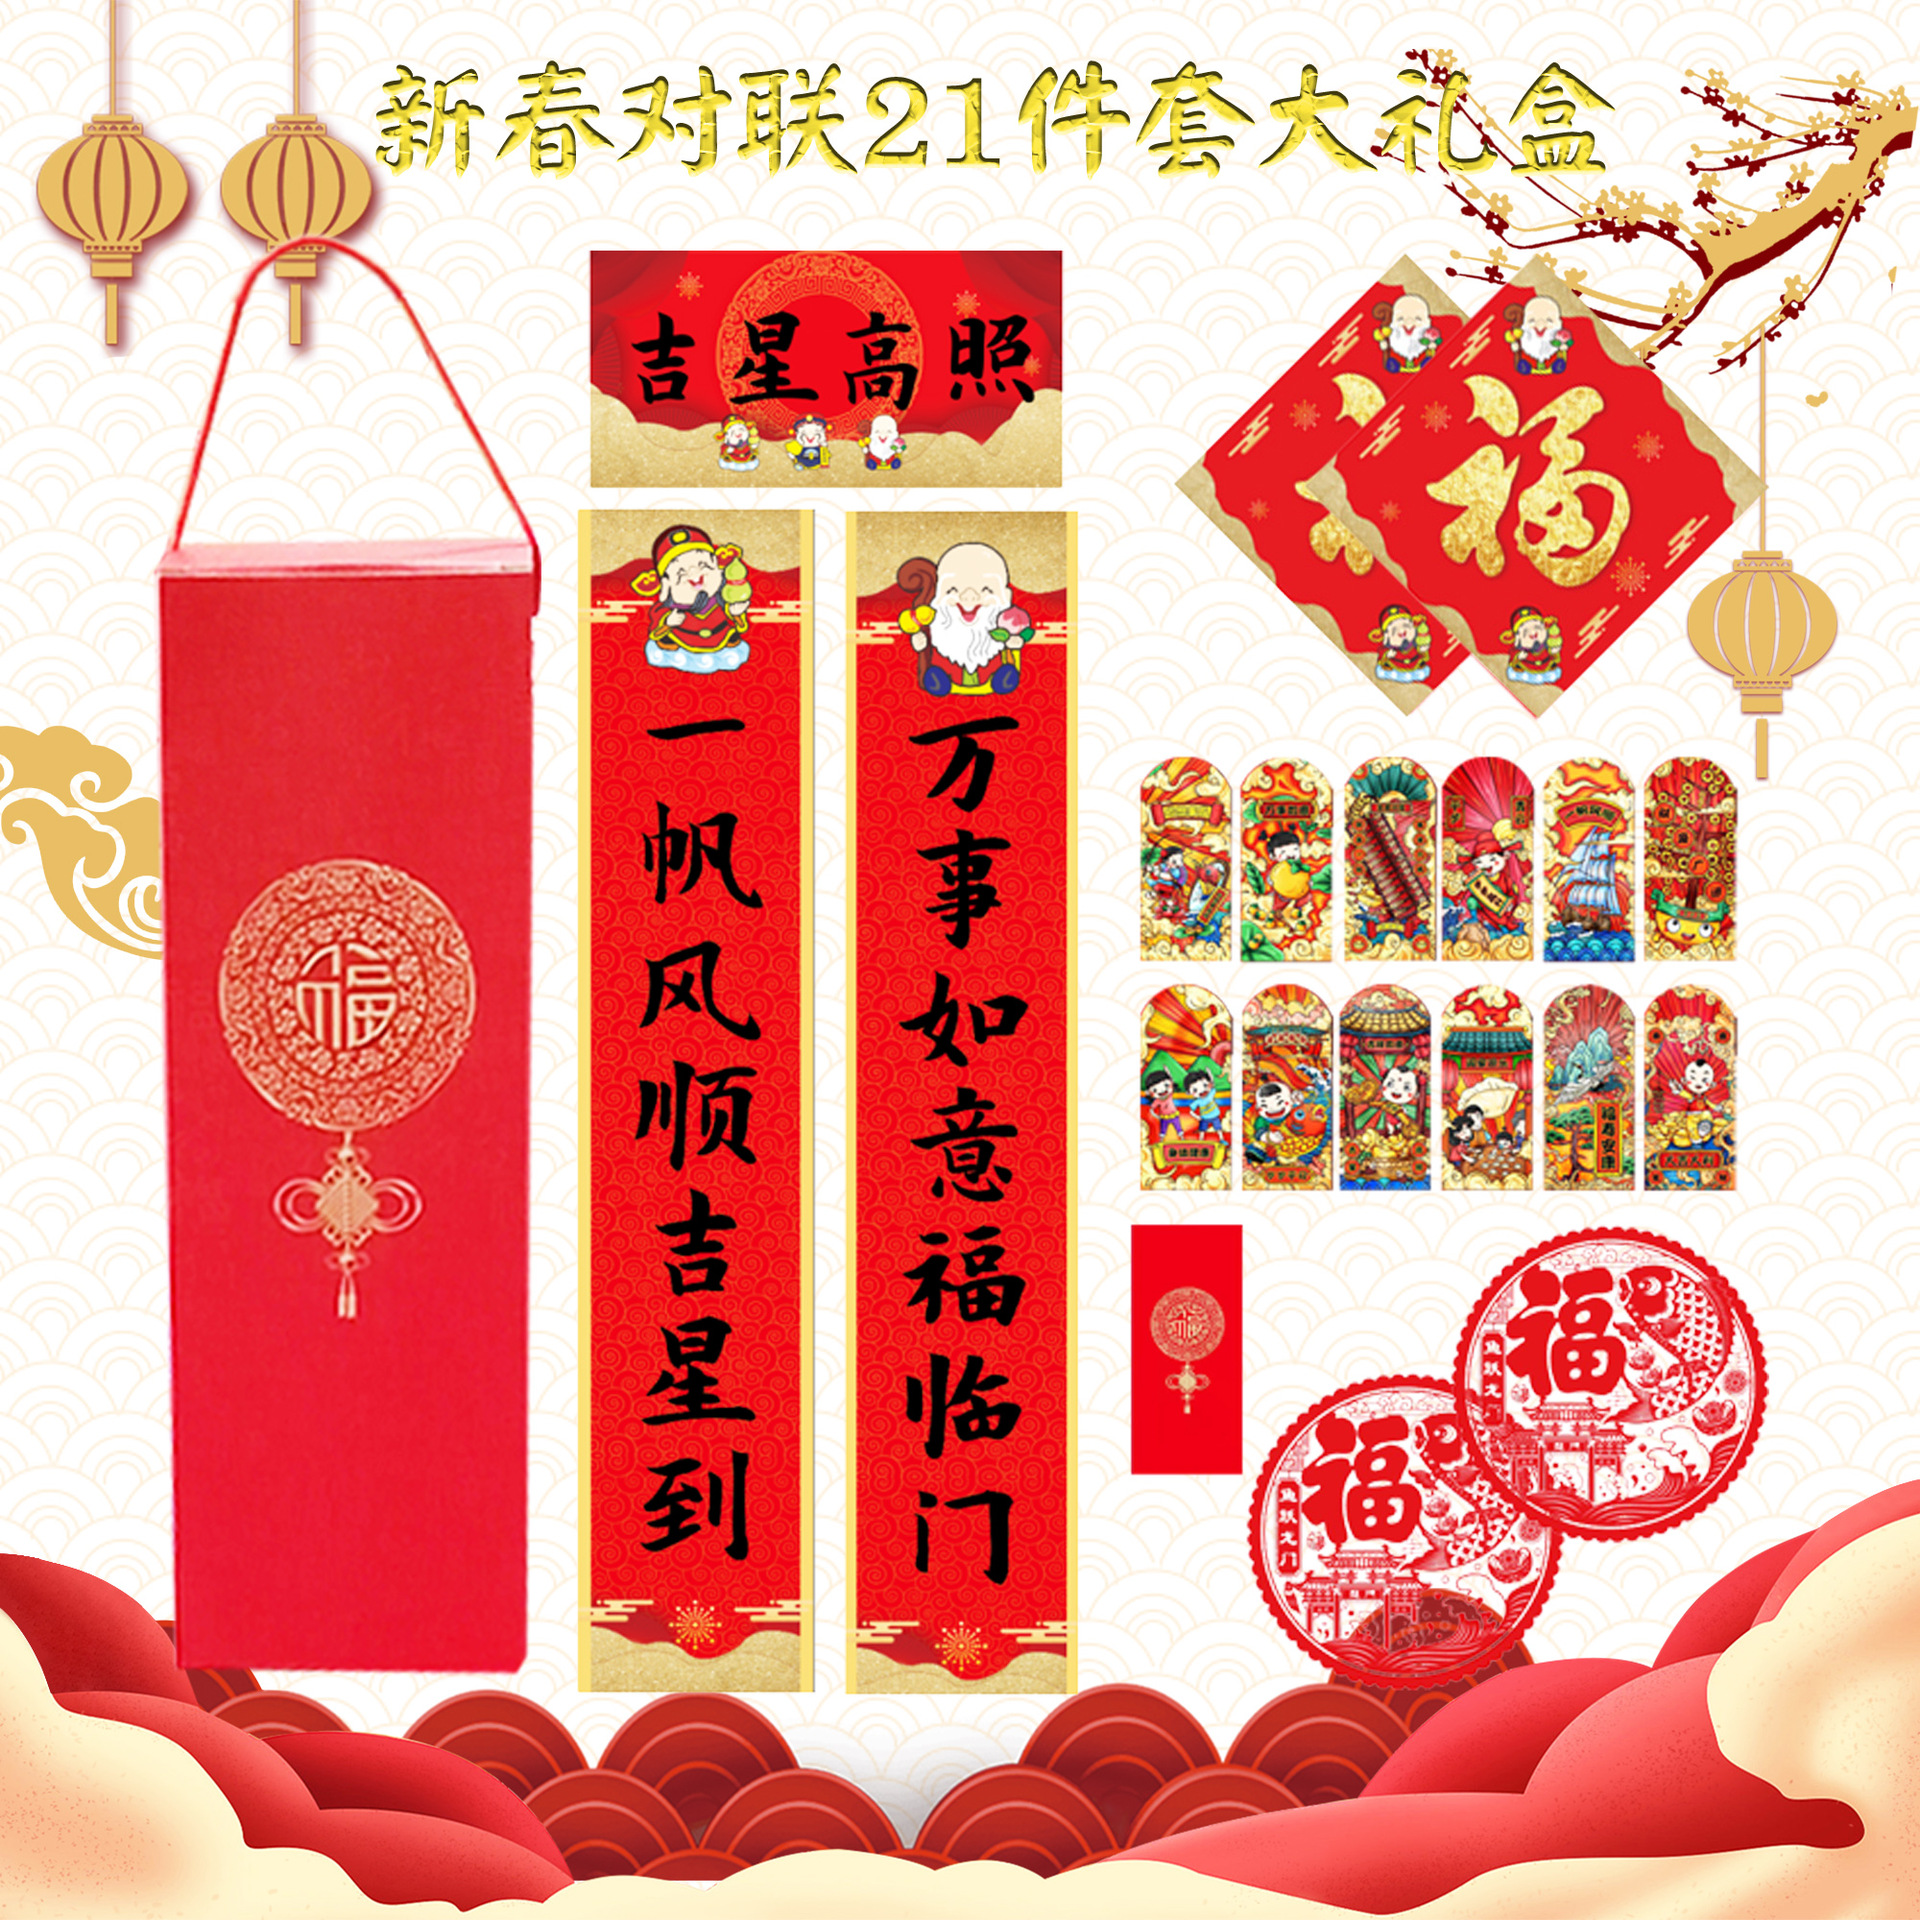 2023 Rabbit Year New Year Couplet Gift Box New Advertising Couplet Corporate Gift Fortune Sticker Spring Festival Gift Bag Printed Logo